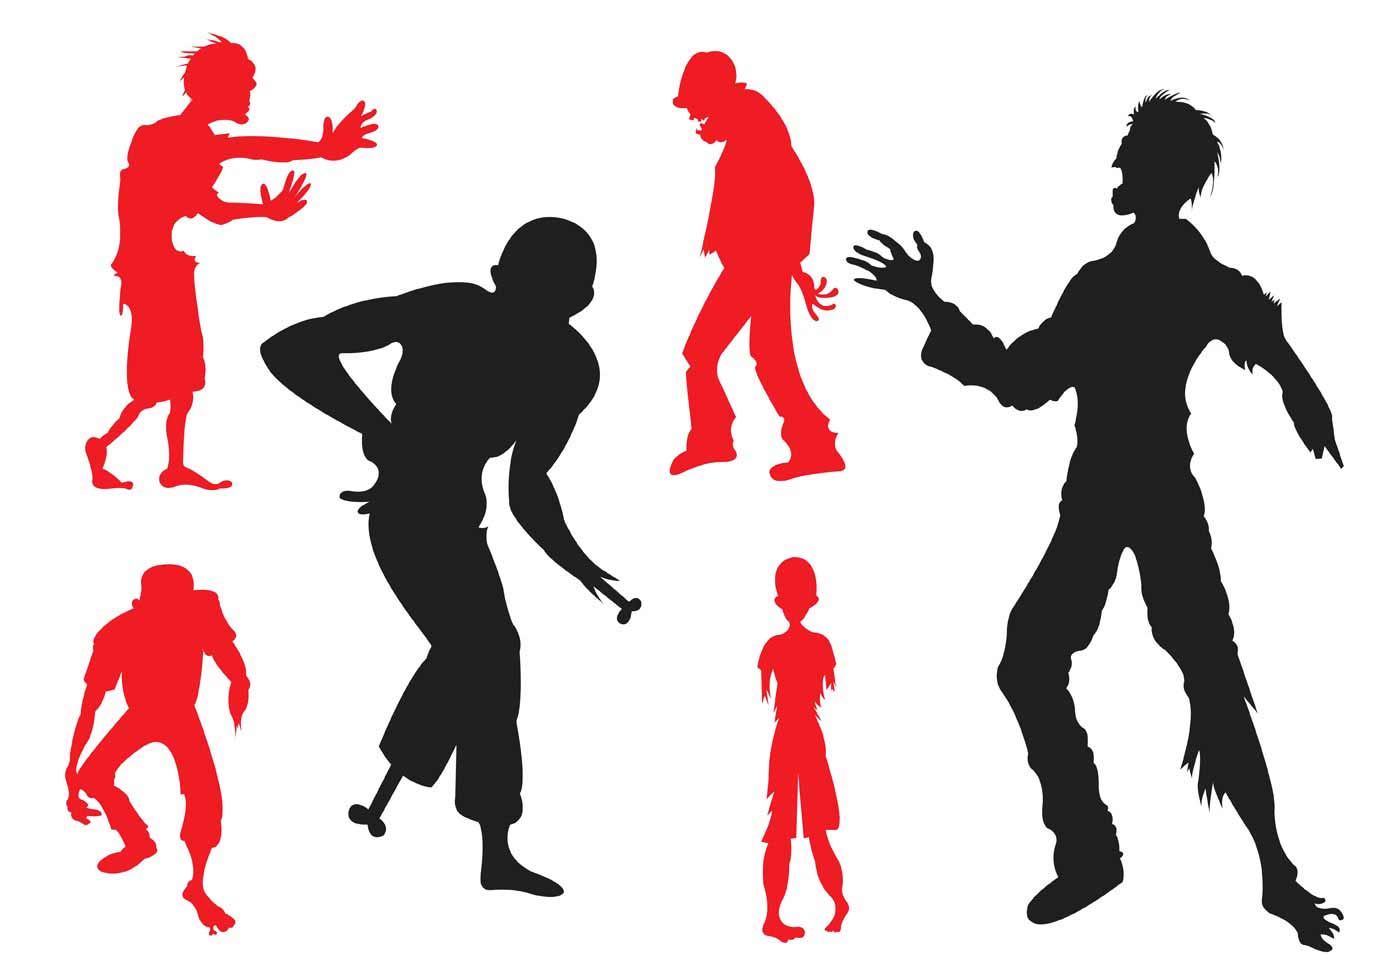 Download Vector Silhouette of Zombies - Download Free Vector Art, Stock Graphics & Images